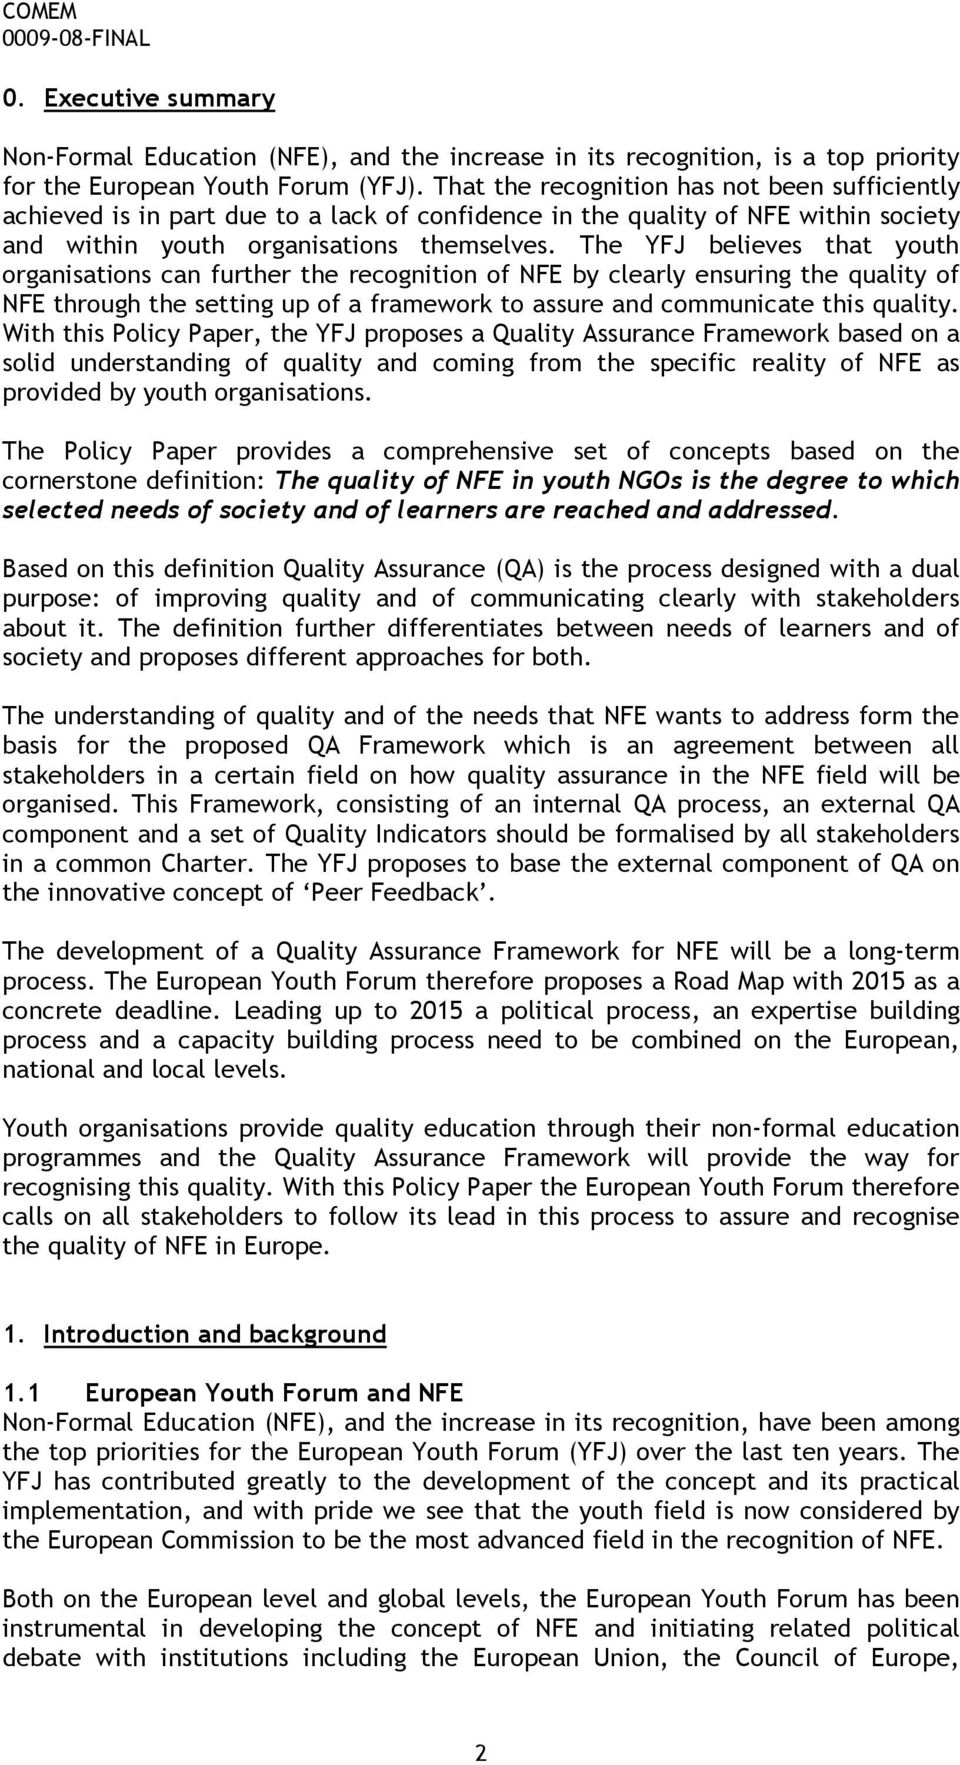 The YFJ believes that youth organisations can further the recognition of NFE by clearly ensuring the quality of NFE through the setting up of a framework to assure and communicate this quality.